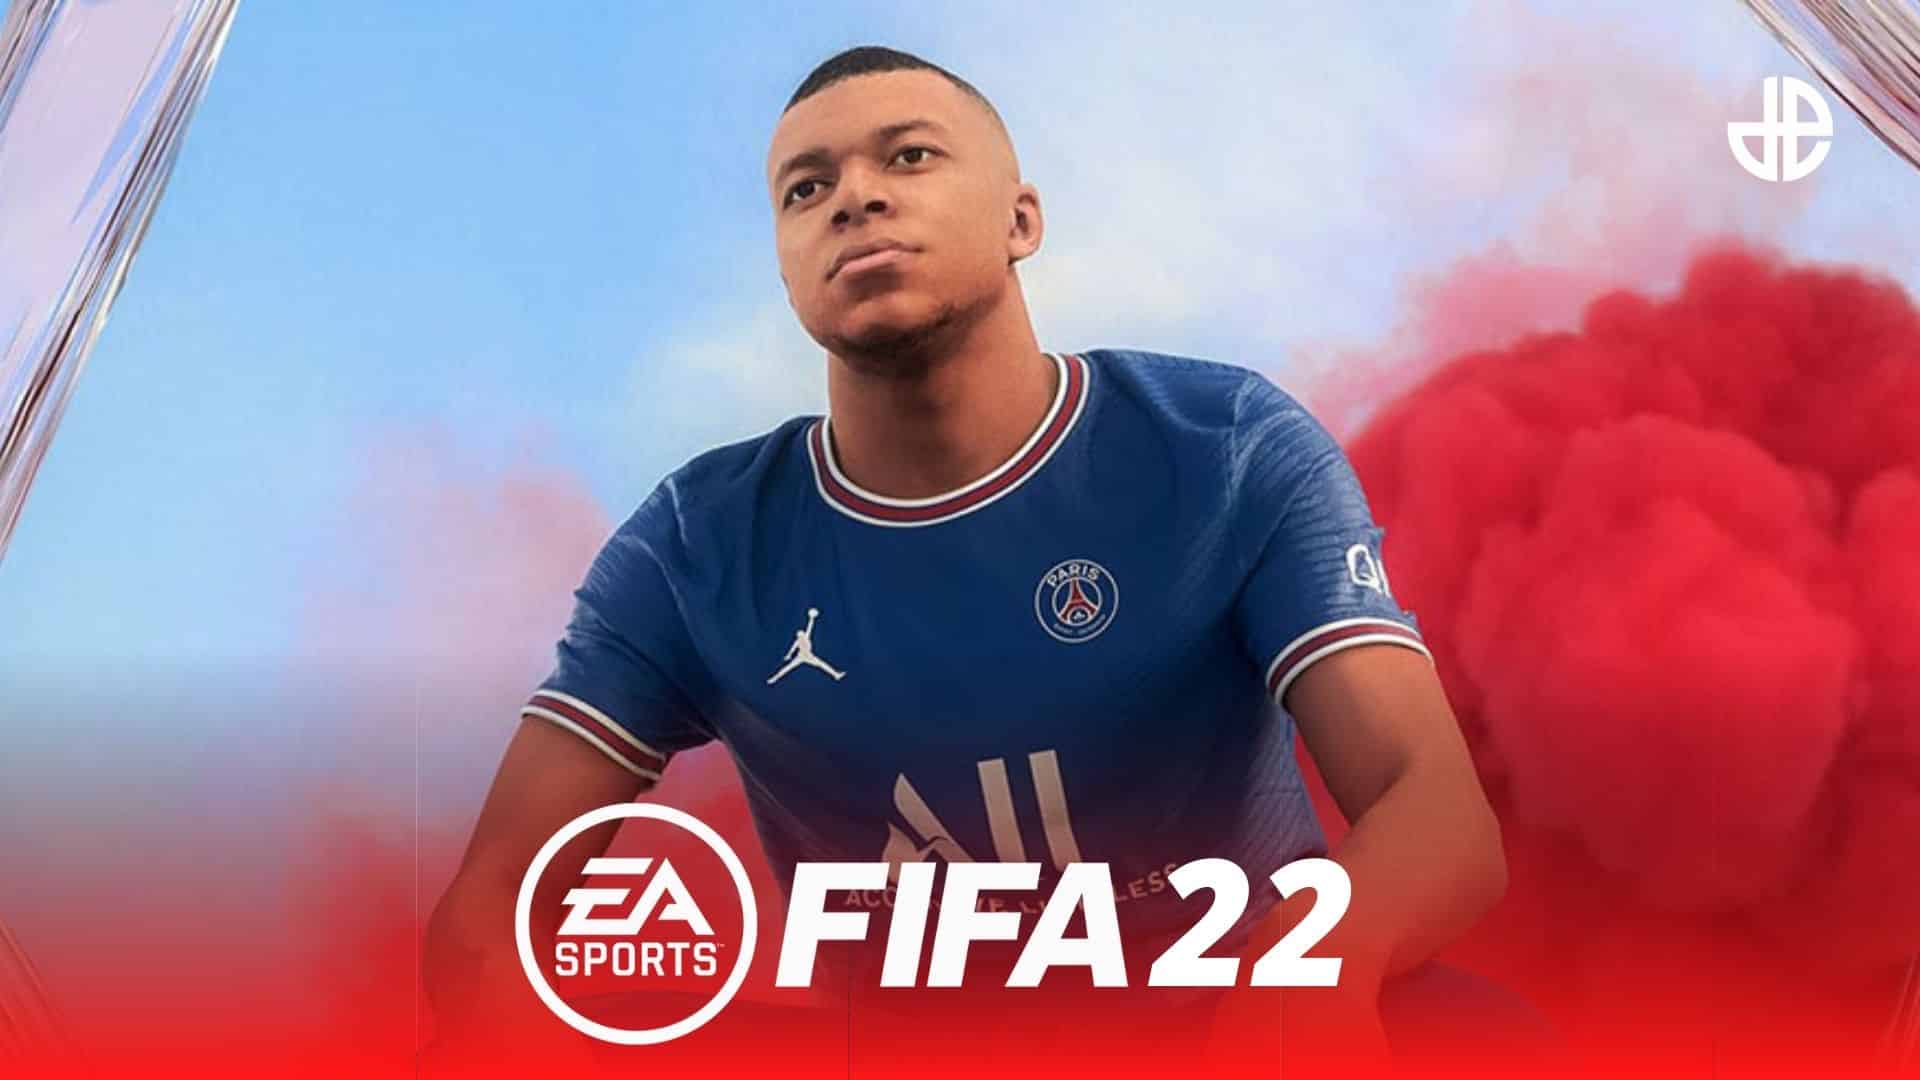 download fifa 22 game pass for free